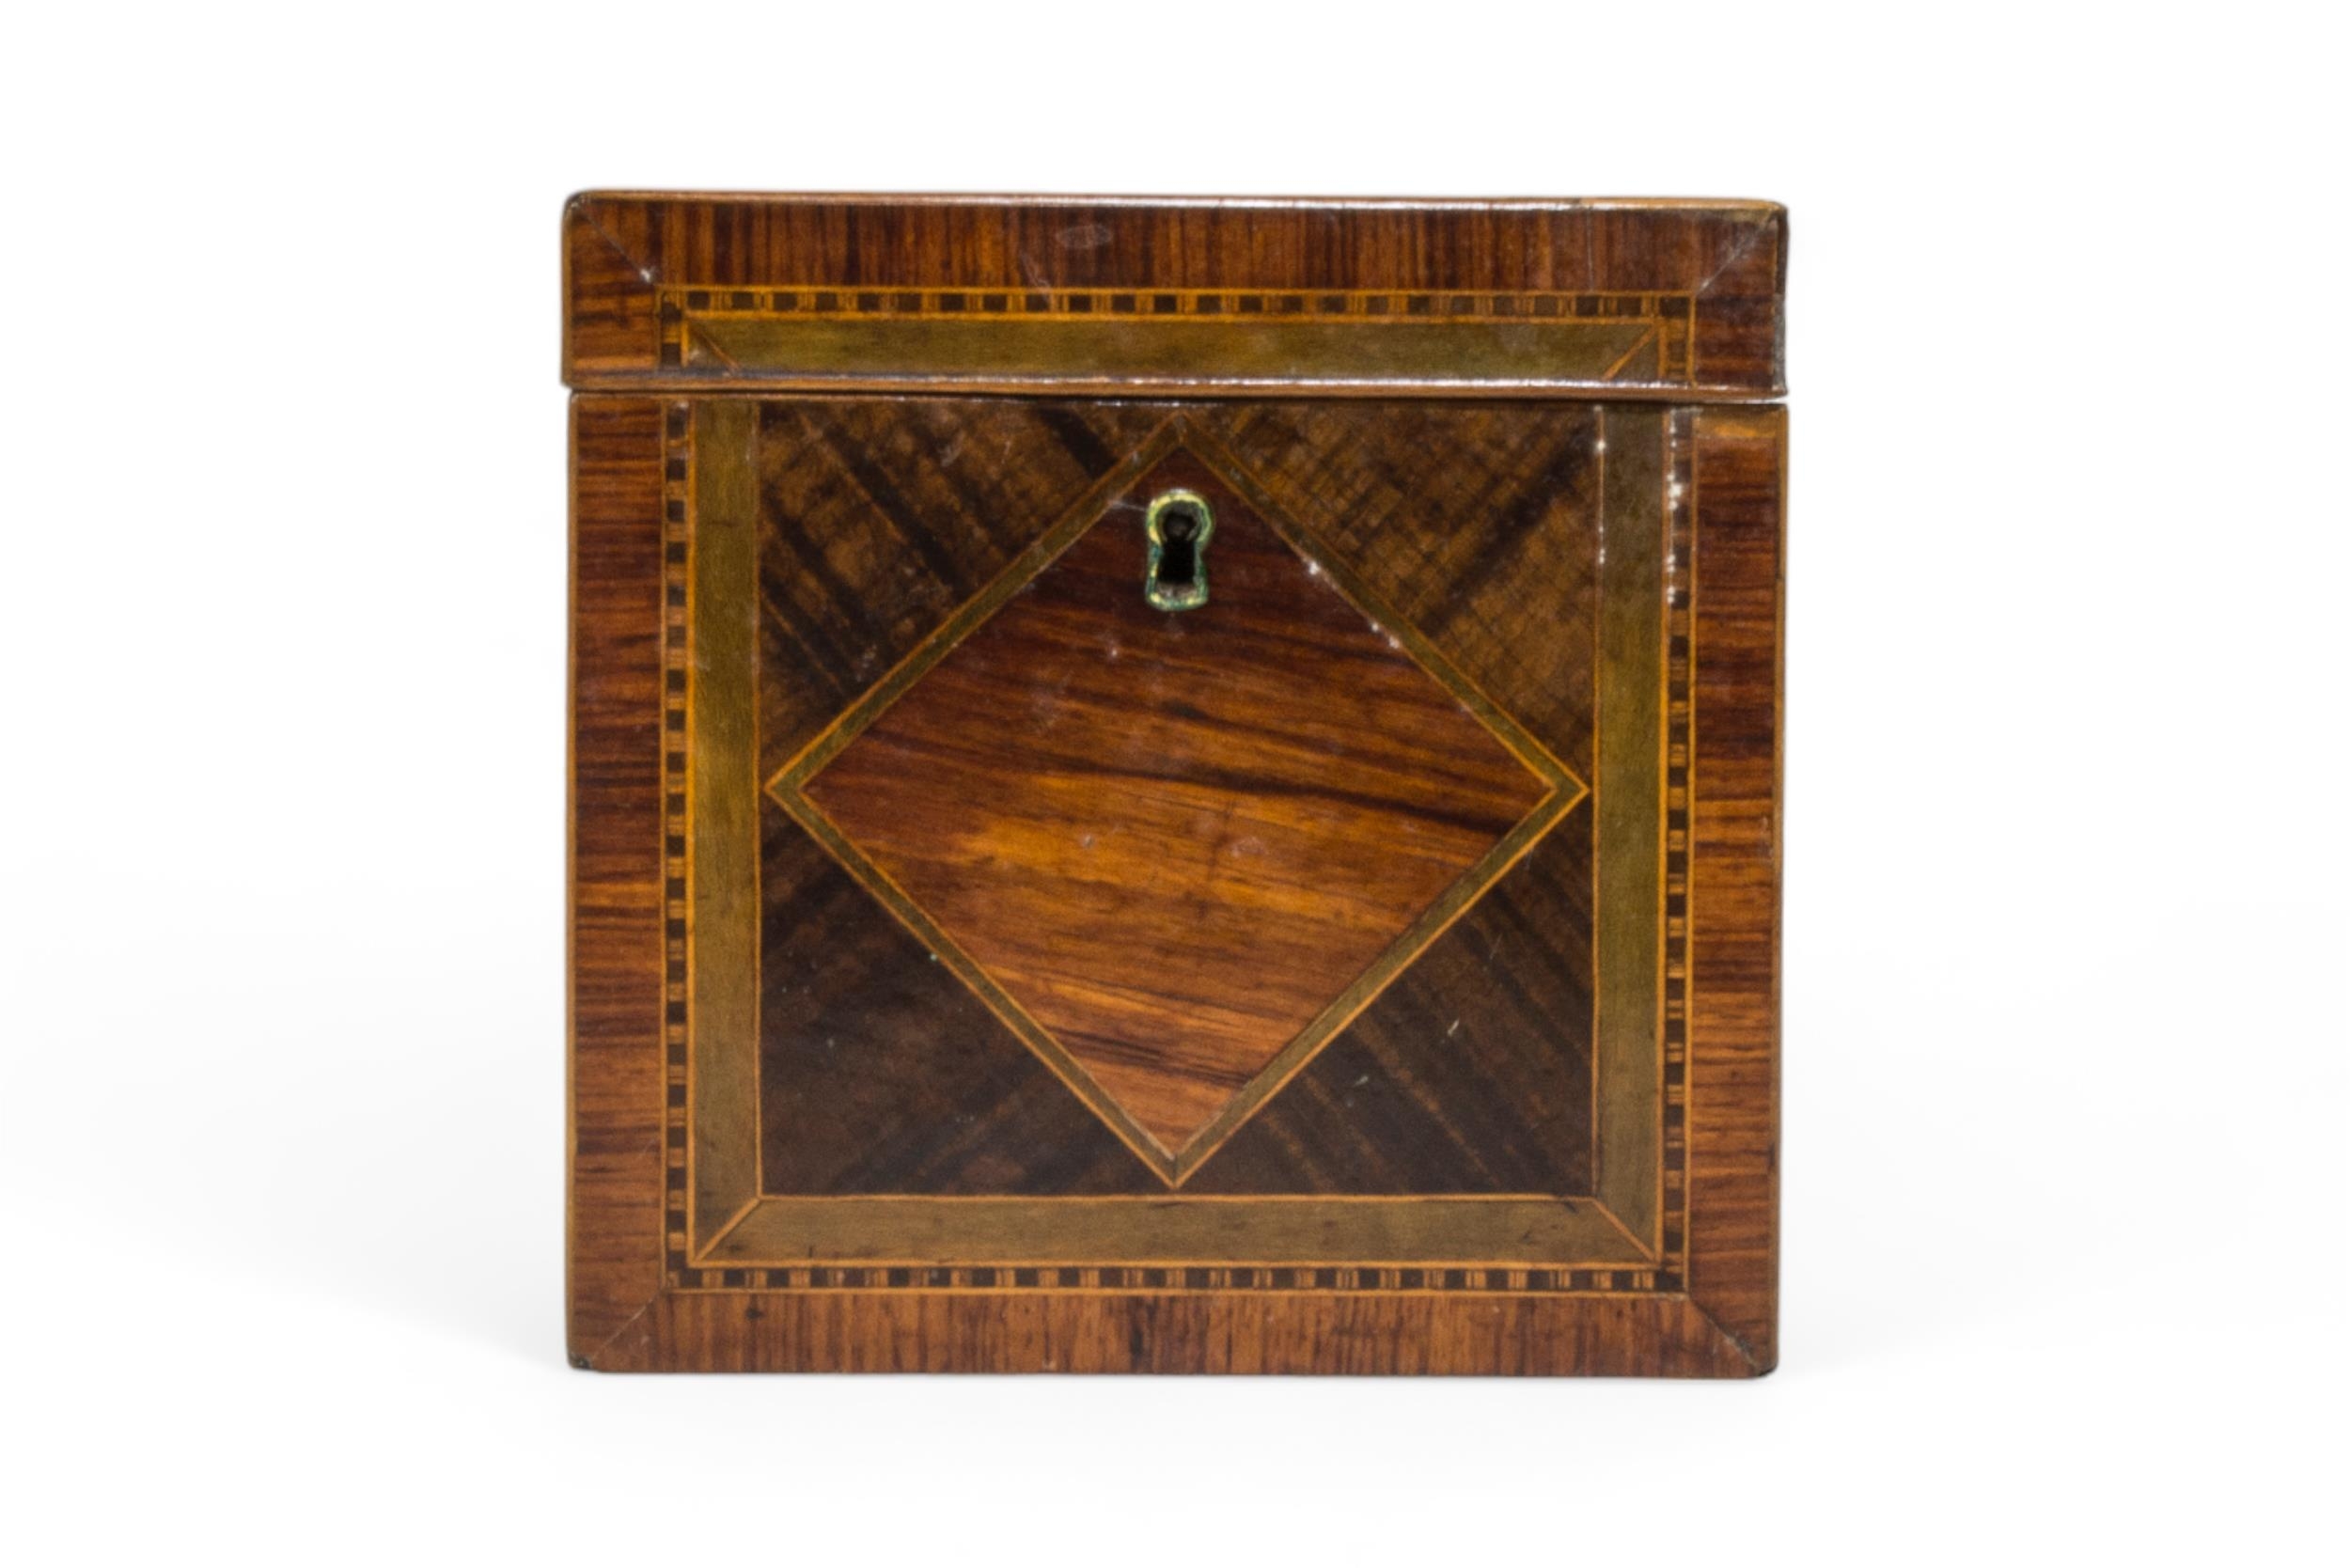 A GEORGE III TEA CADDY OF CUBE FORM, variously inlaid with various woods, each face with a diamond - Image 2 of 4